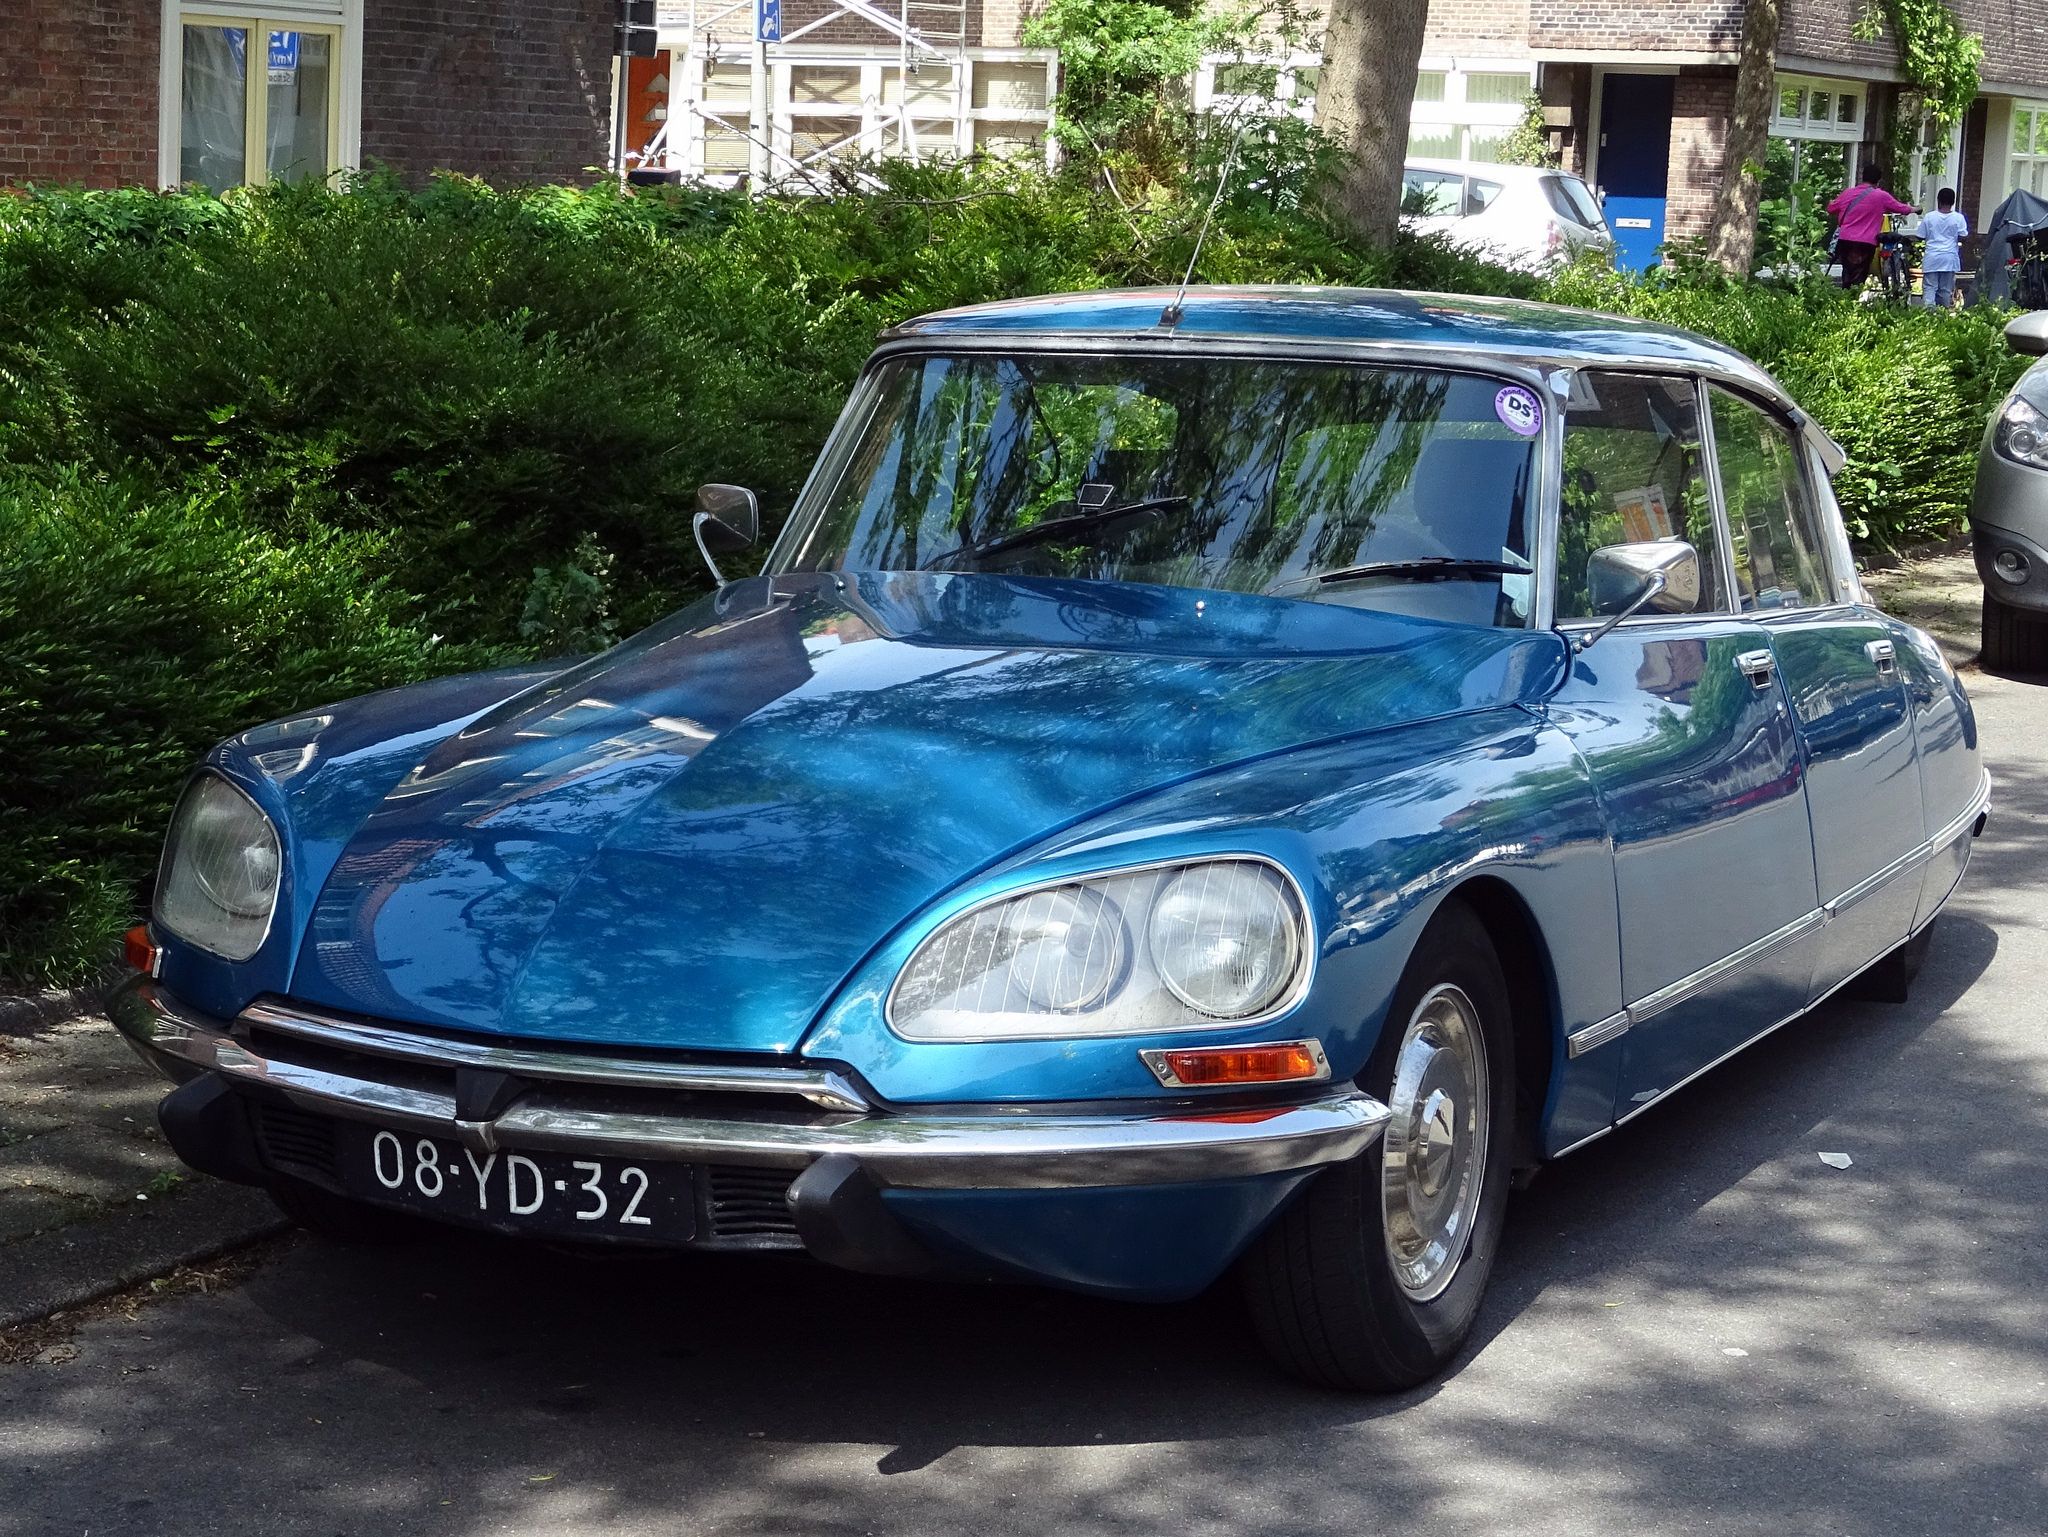 Classic silver Citroën DS 20 parked in a picturesque setting, showcasing its iconic design and elegance.